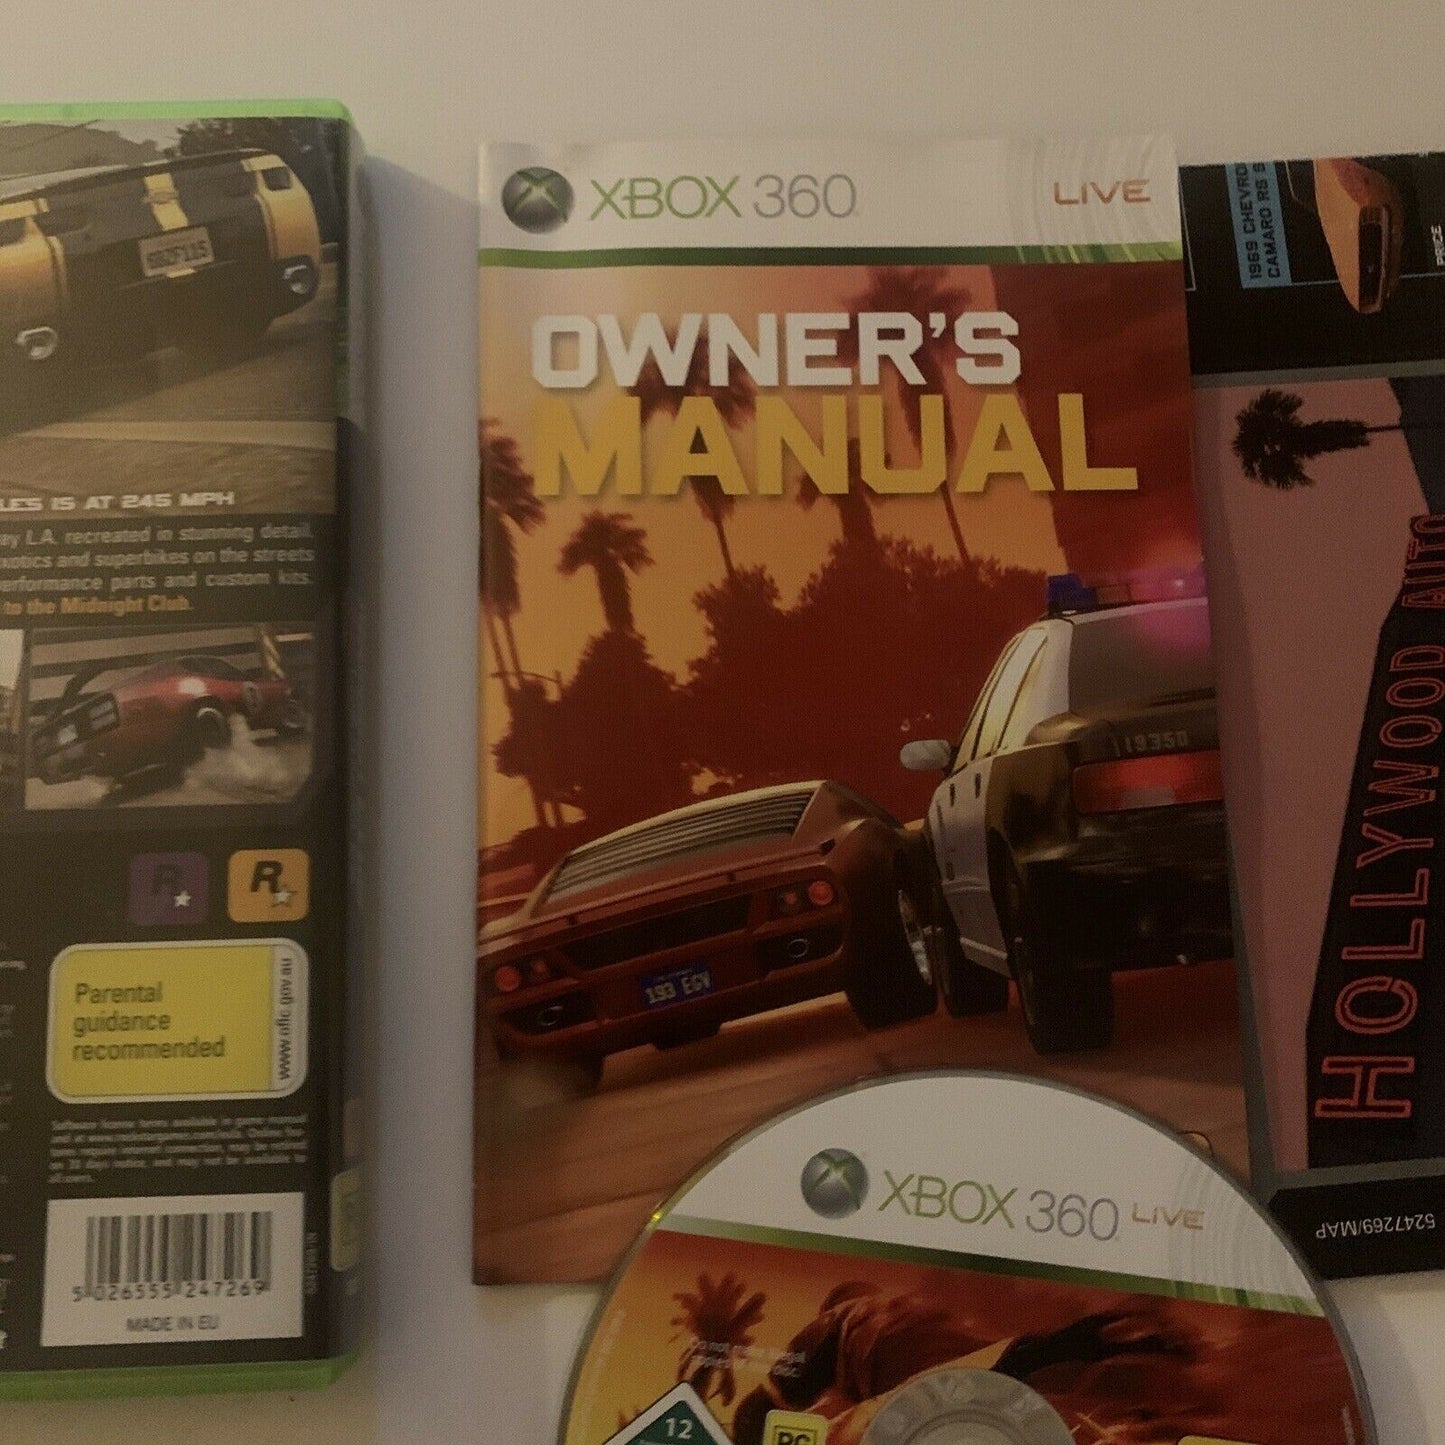 Midnight Club: Los Angeles - Xbox 360 Game - Complete With Manual & Map 🇦🇺